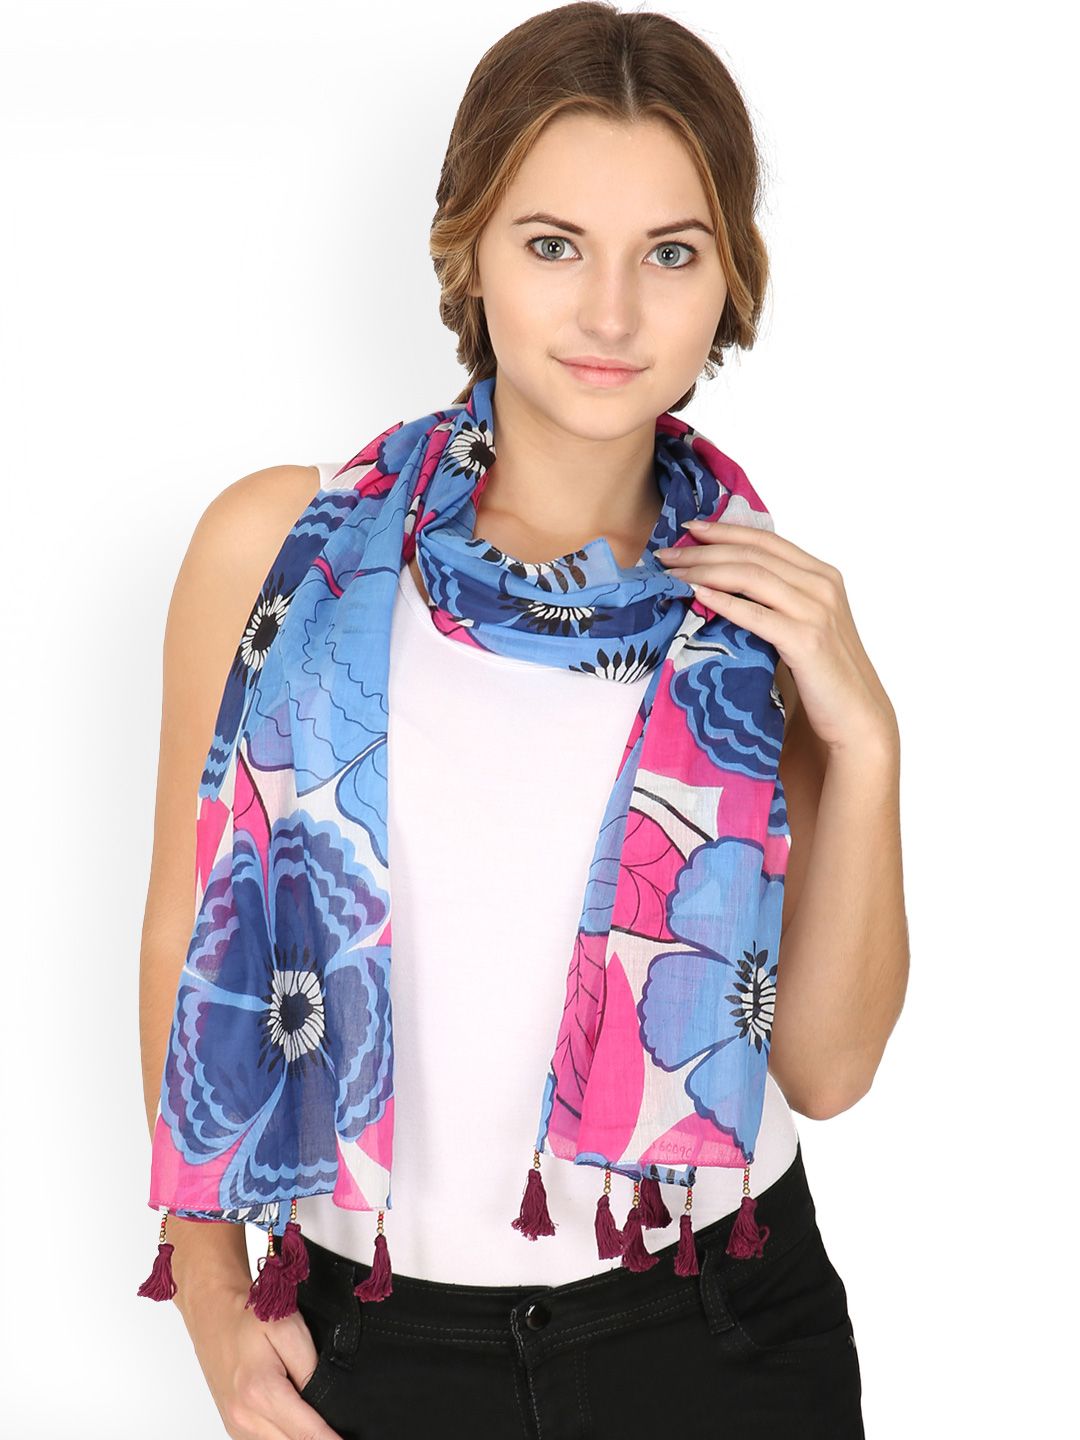 Anekaant Pink & Blue Floral Print Scarf Price in India